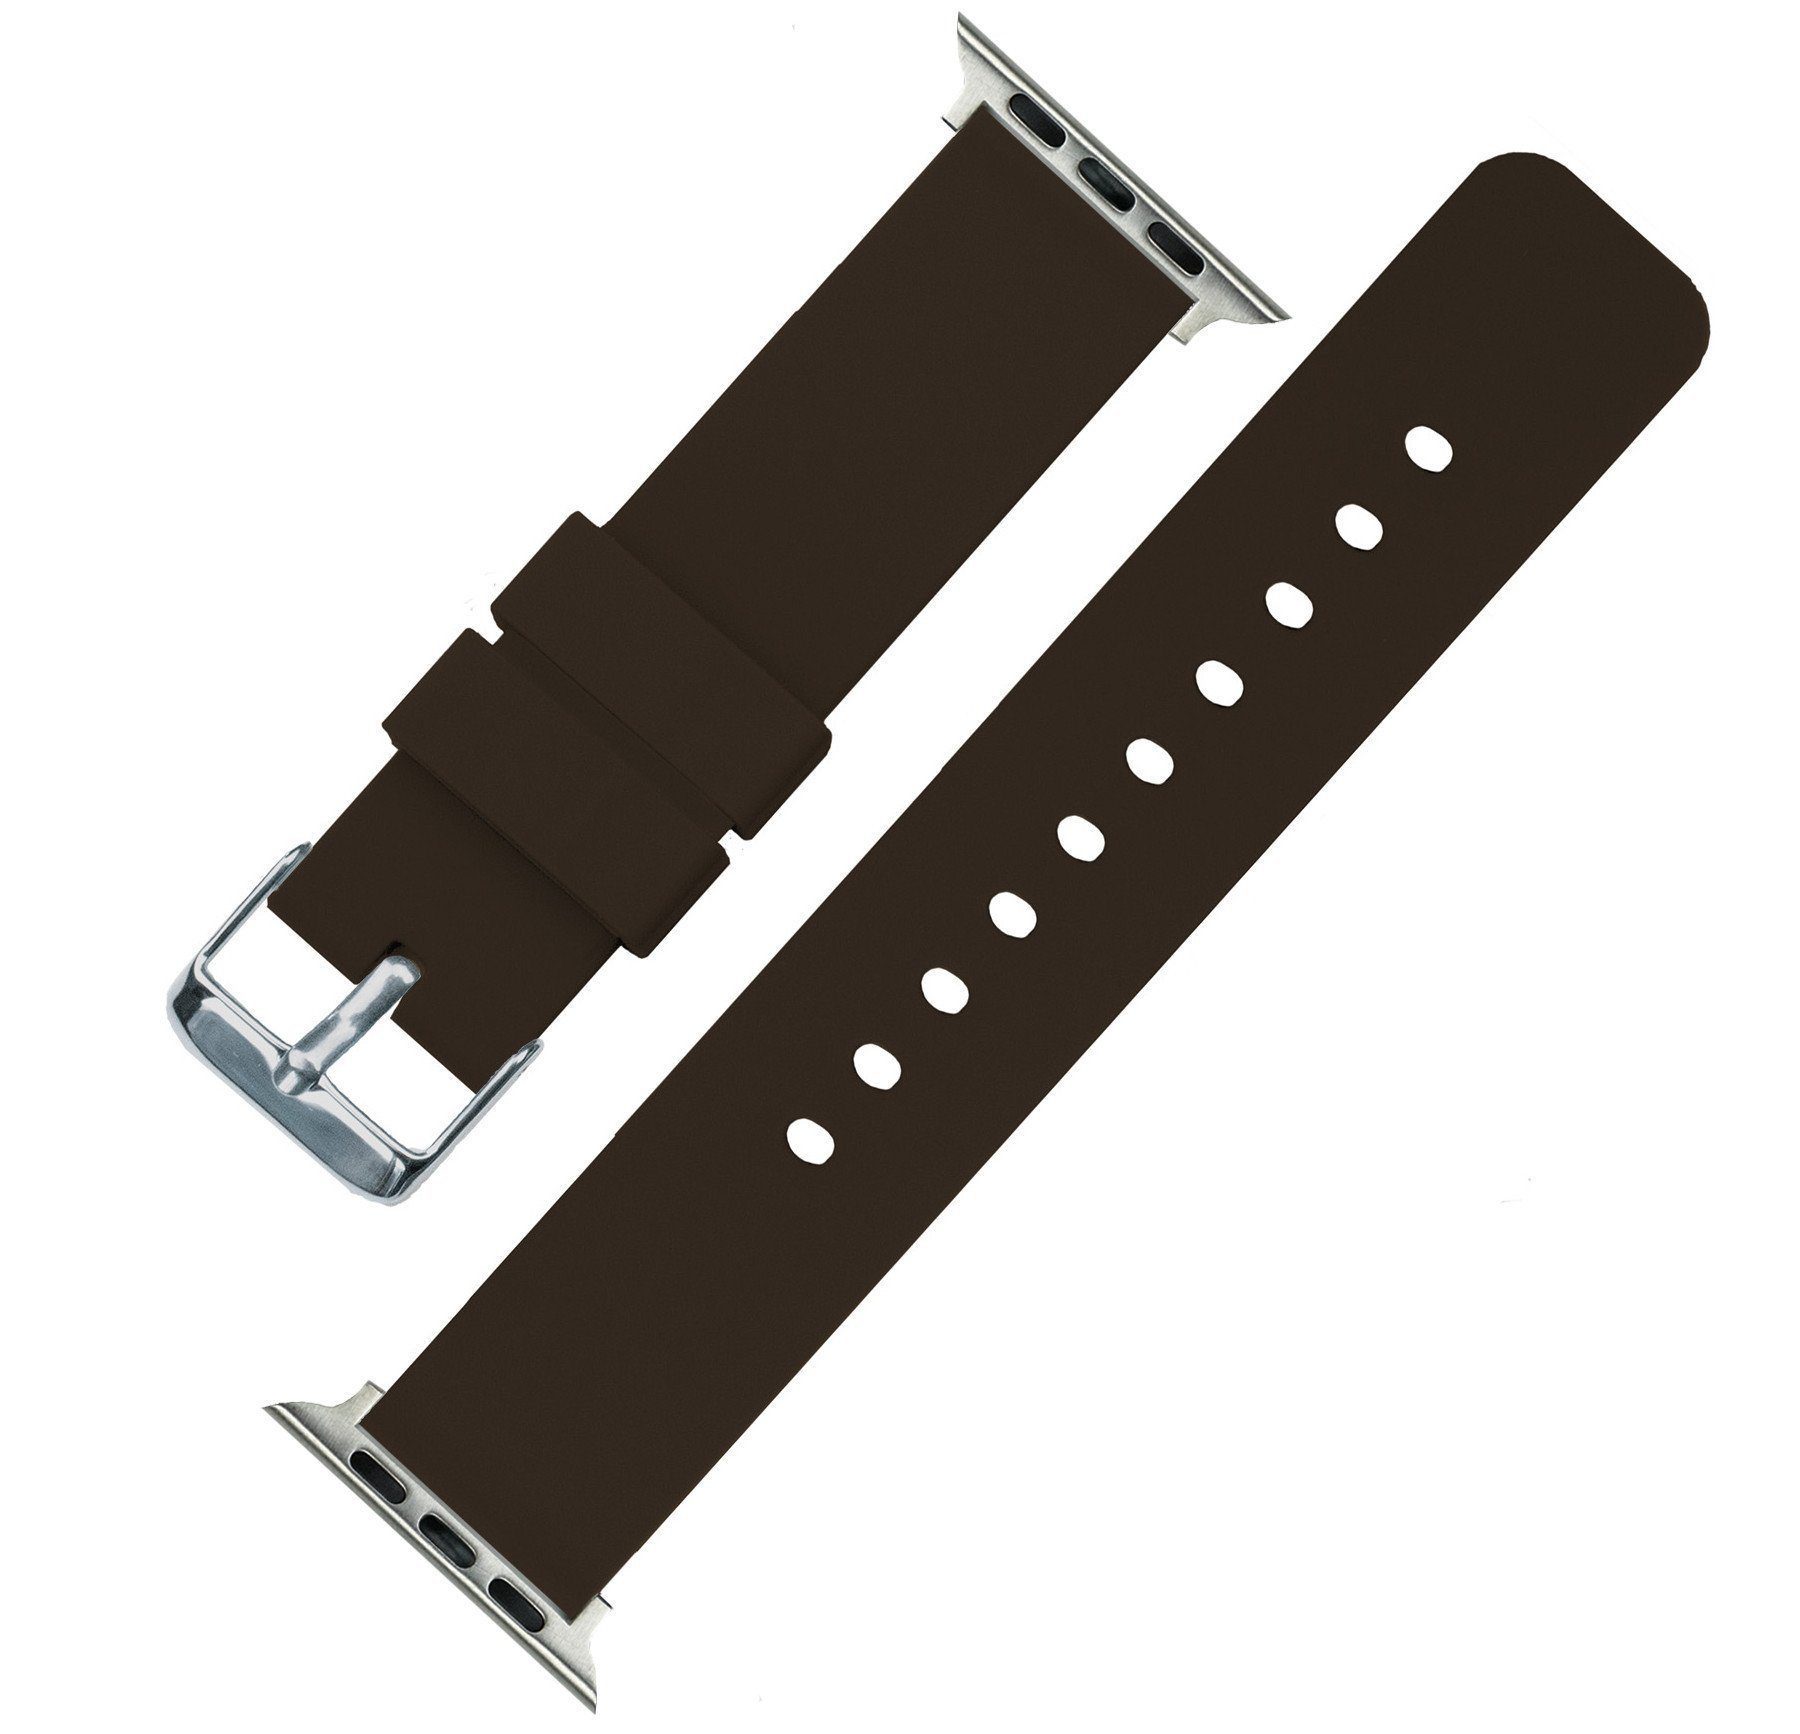 Brown Apple Watch Band | Rubber Apple Watch Band – Barton Watch Bands